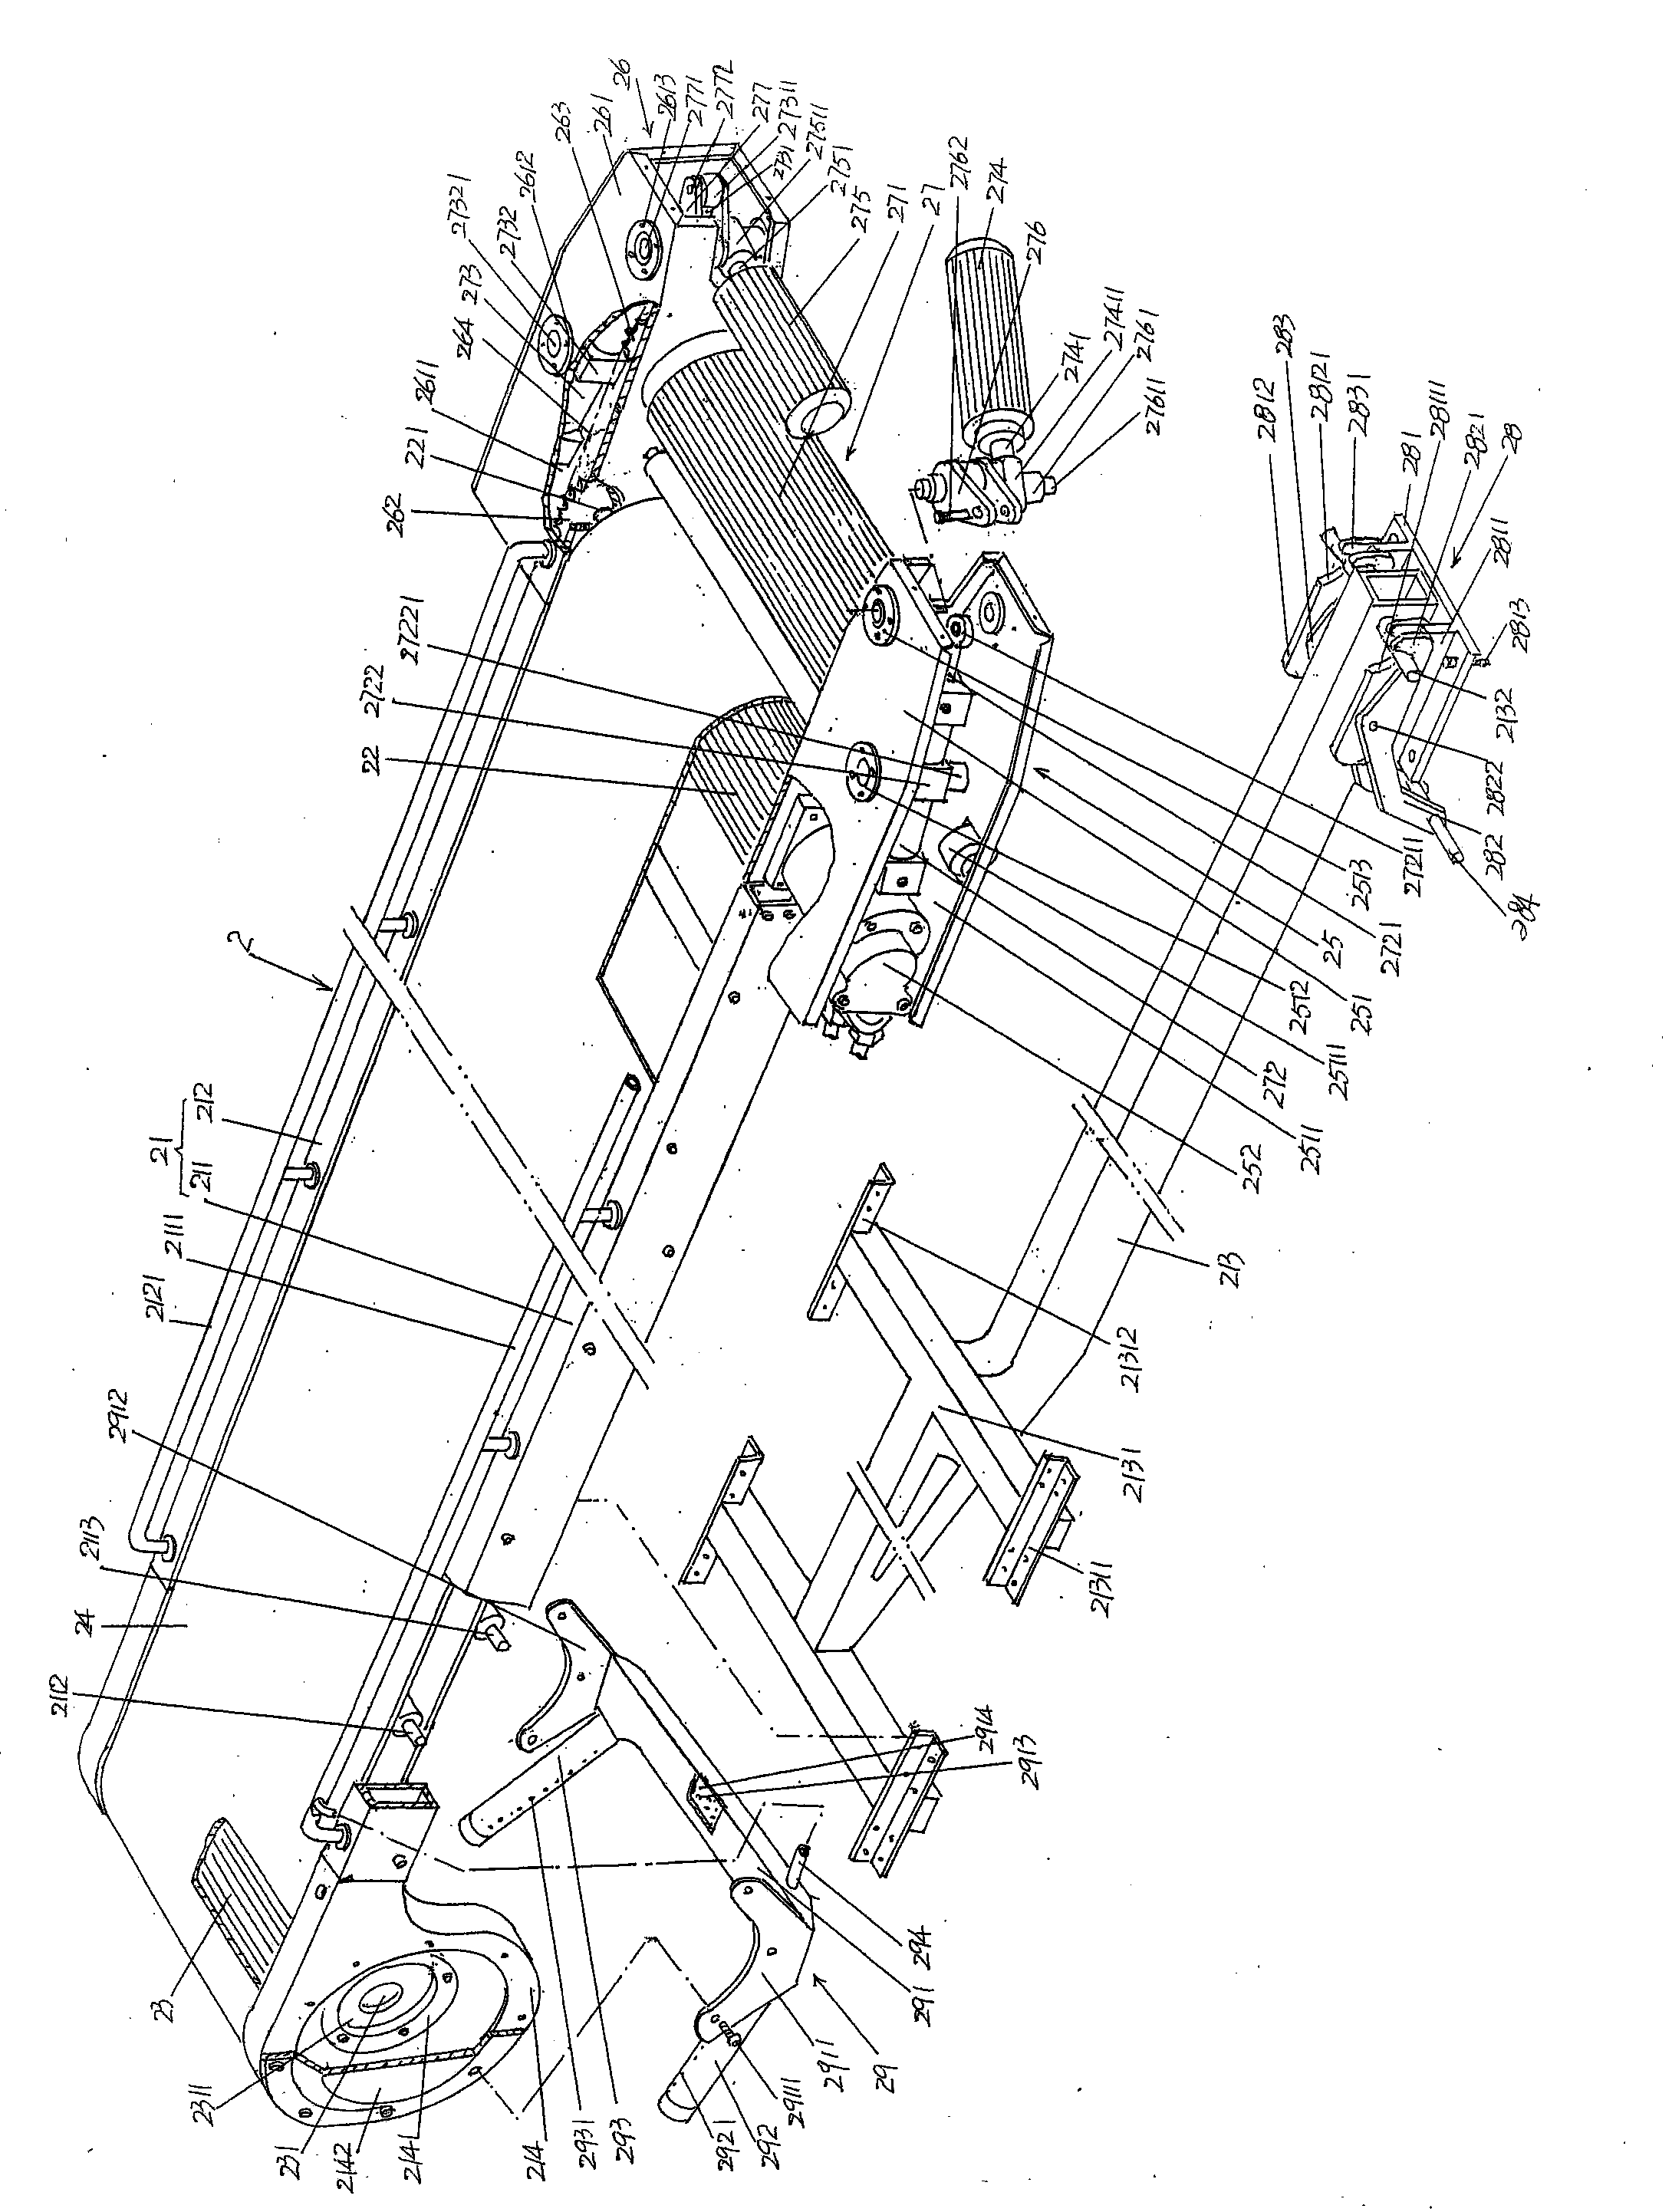 Fire engine for automatically spreading fire hose